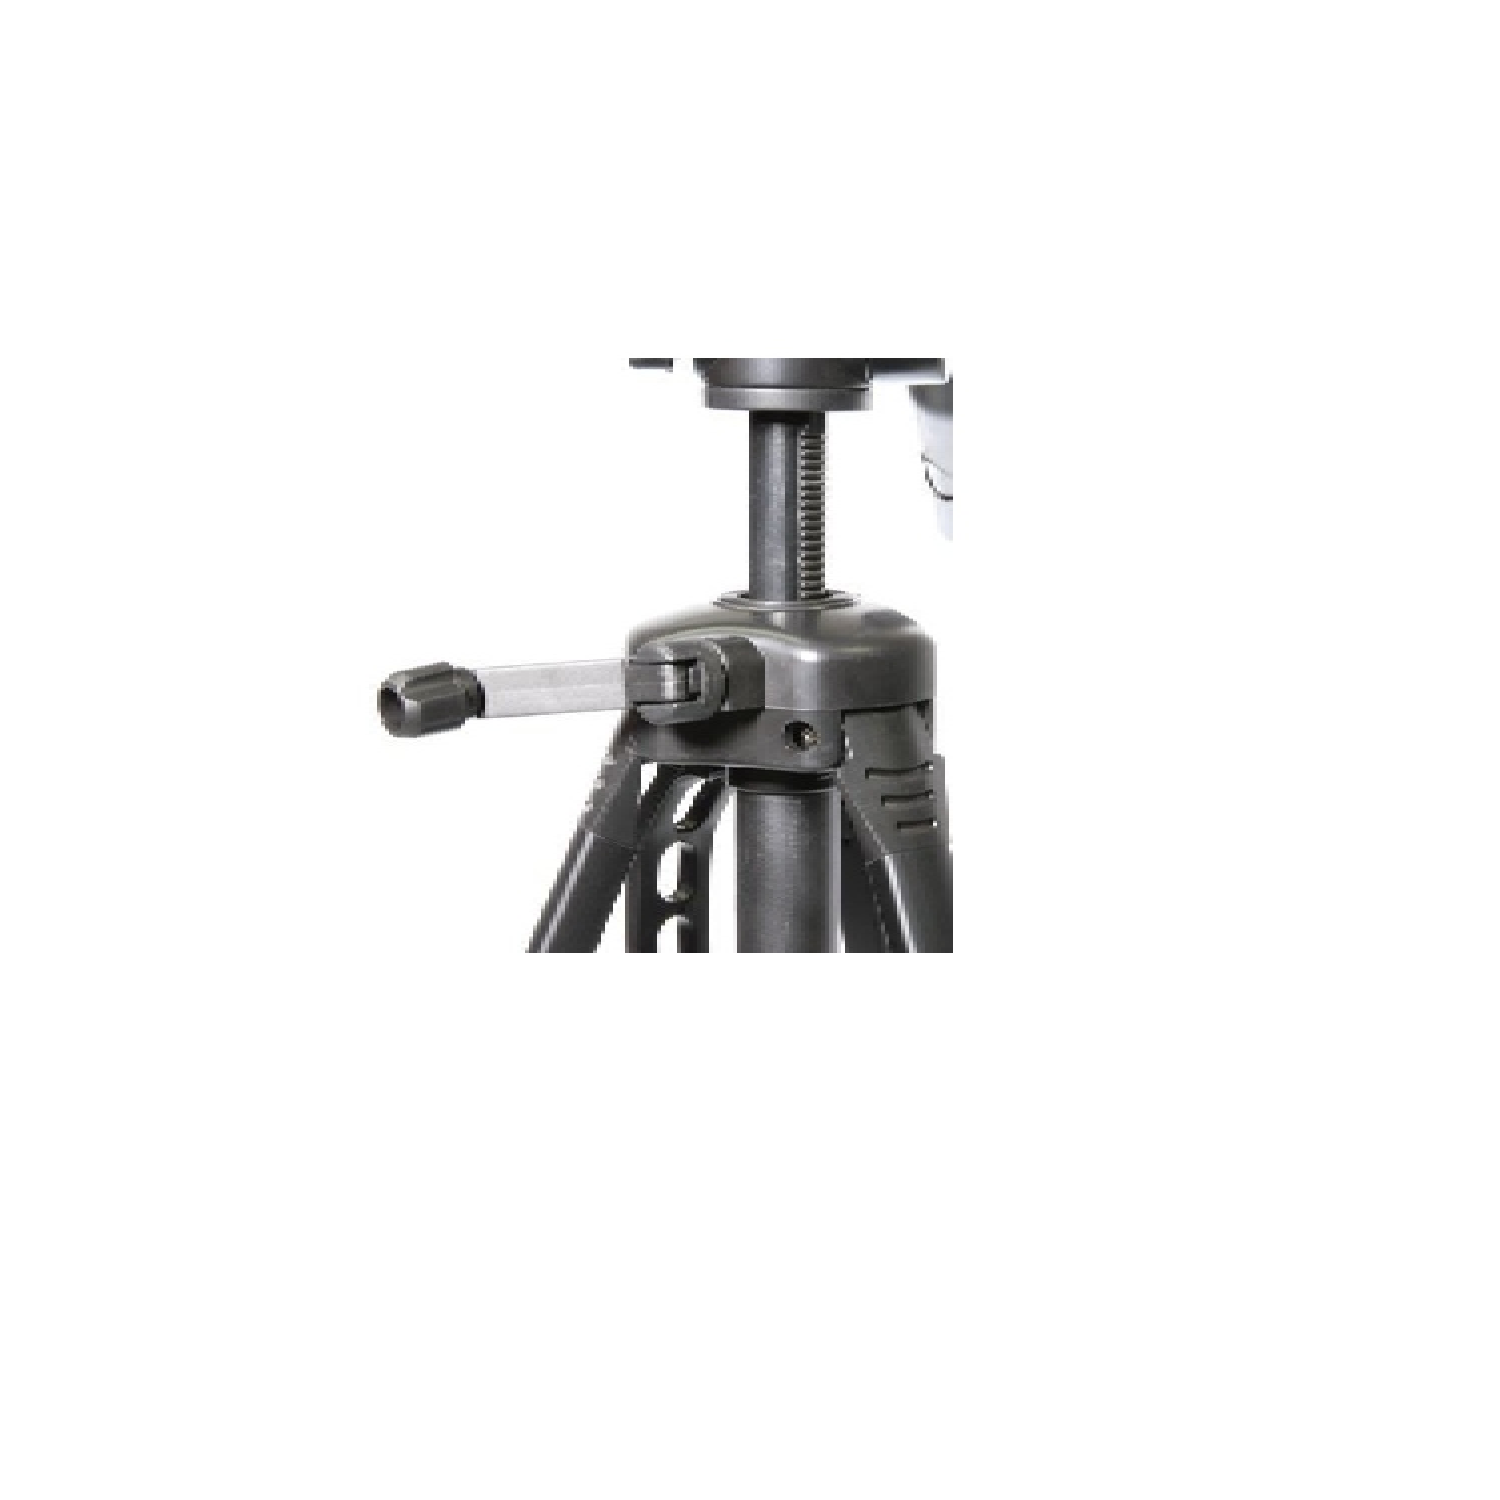 Optex OPT357 Video Tripod with 3-Way Head